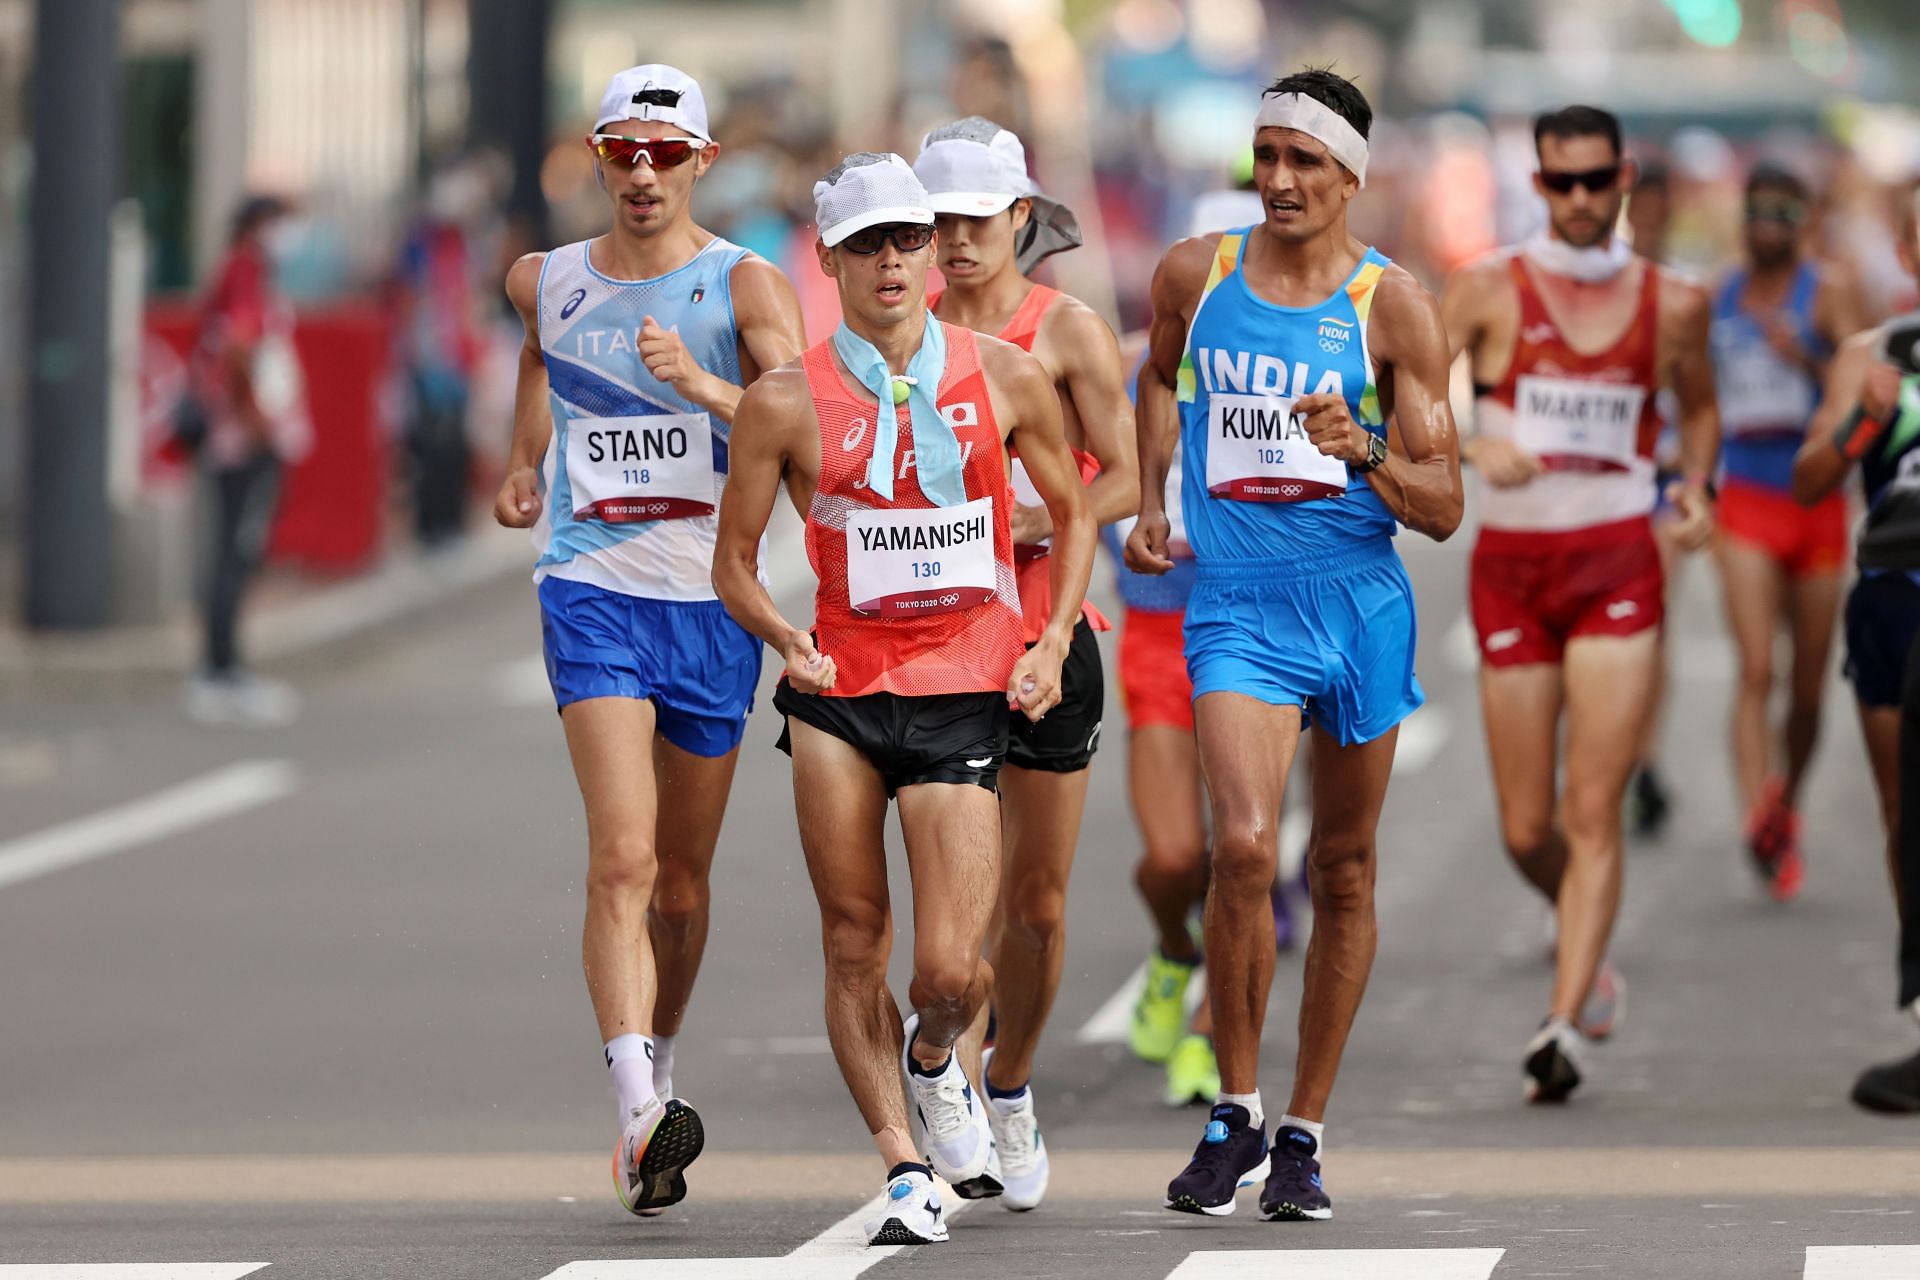 Sandeep Kumar (in blue) at the Tokyo Olympics (Image courtesy: Getty Images)